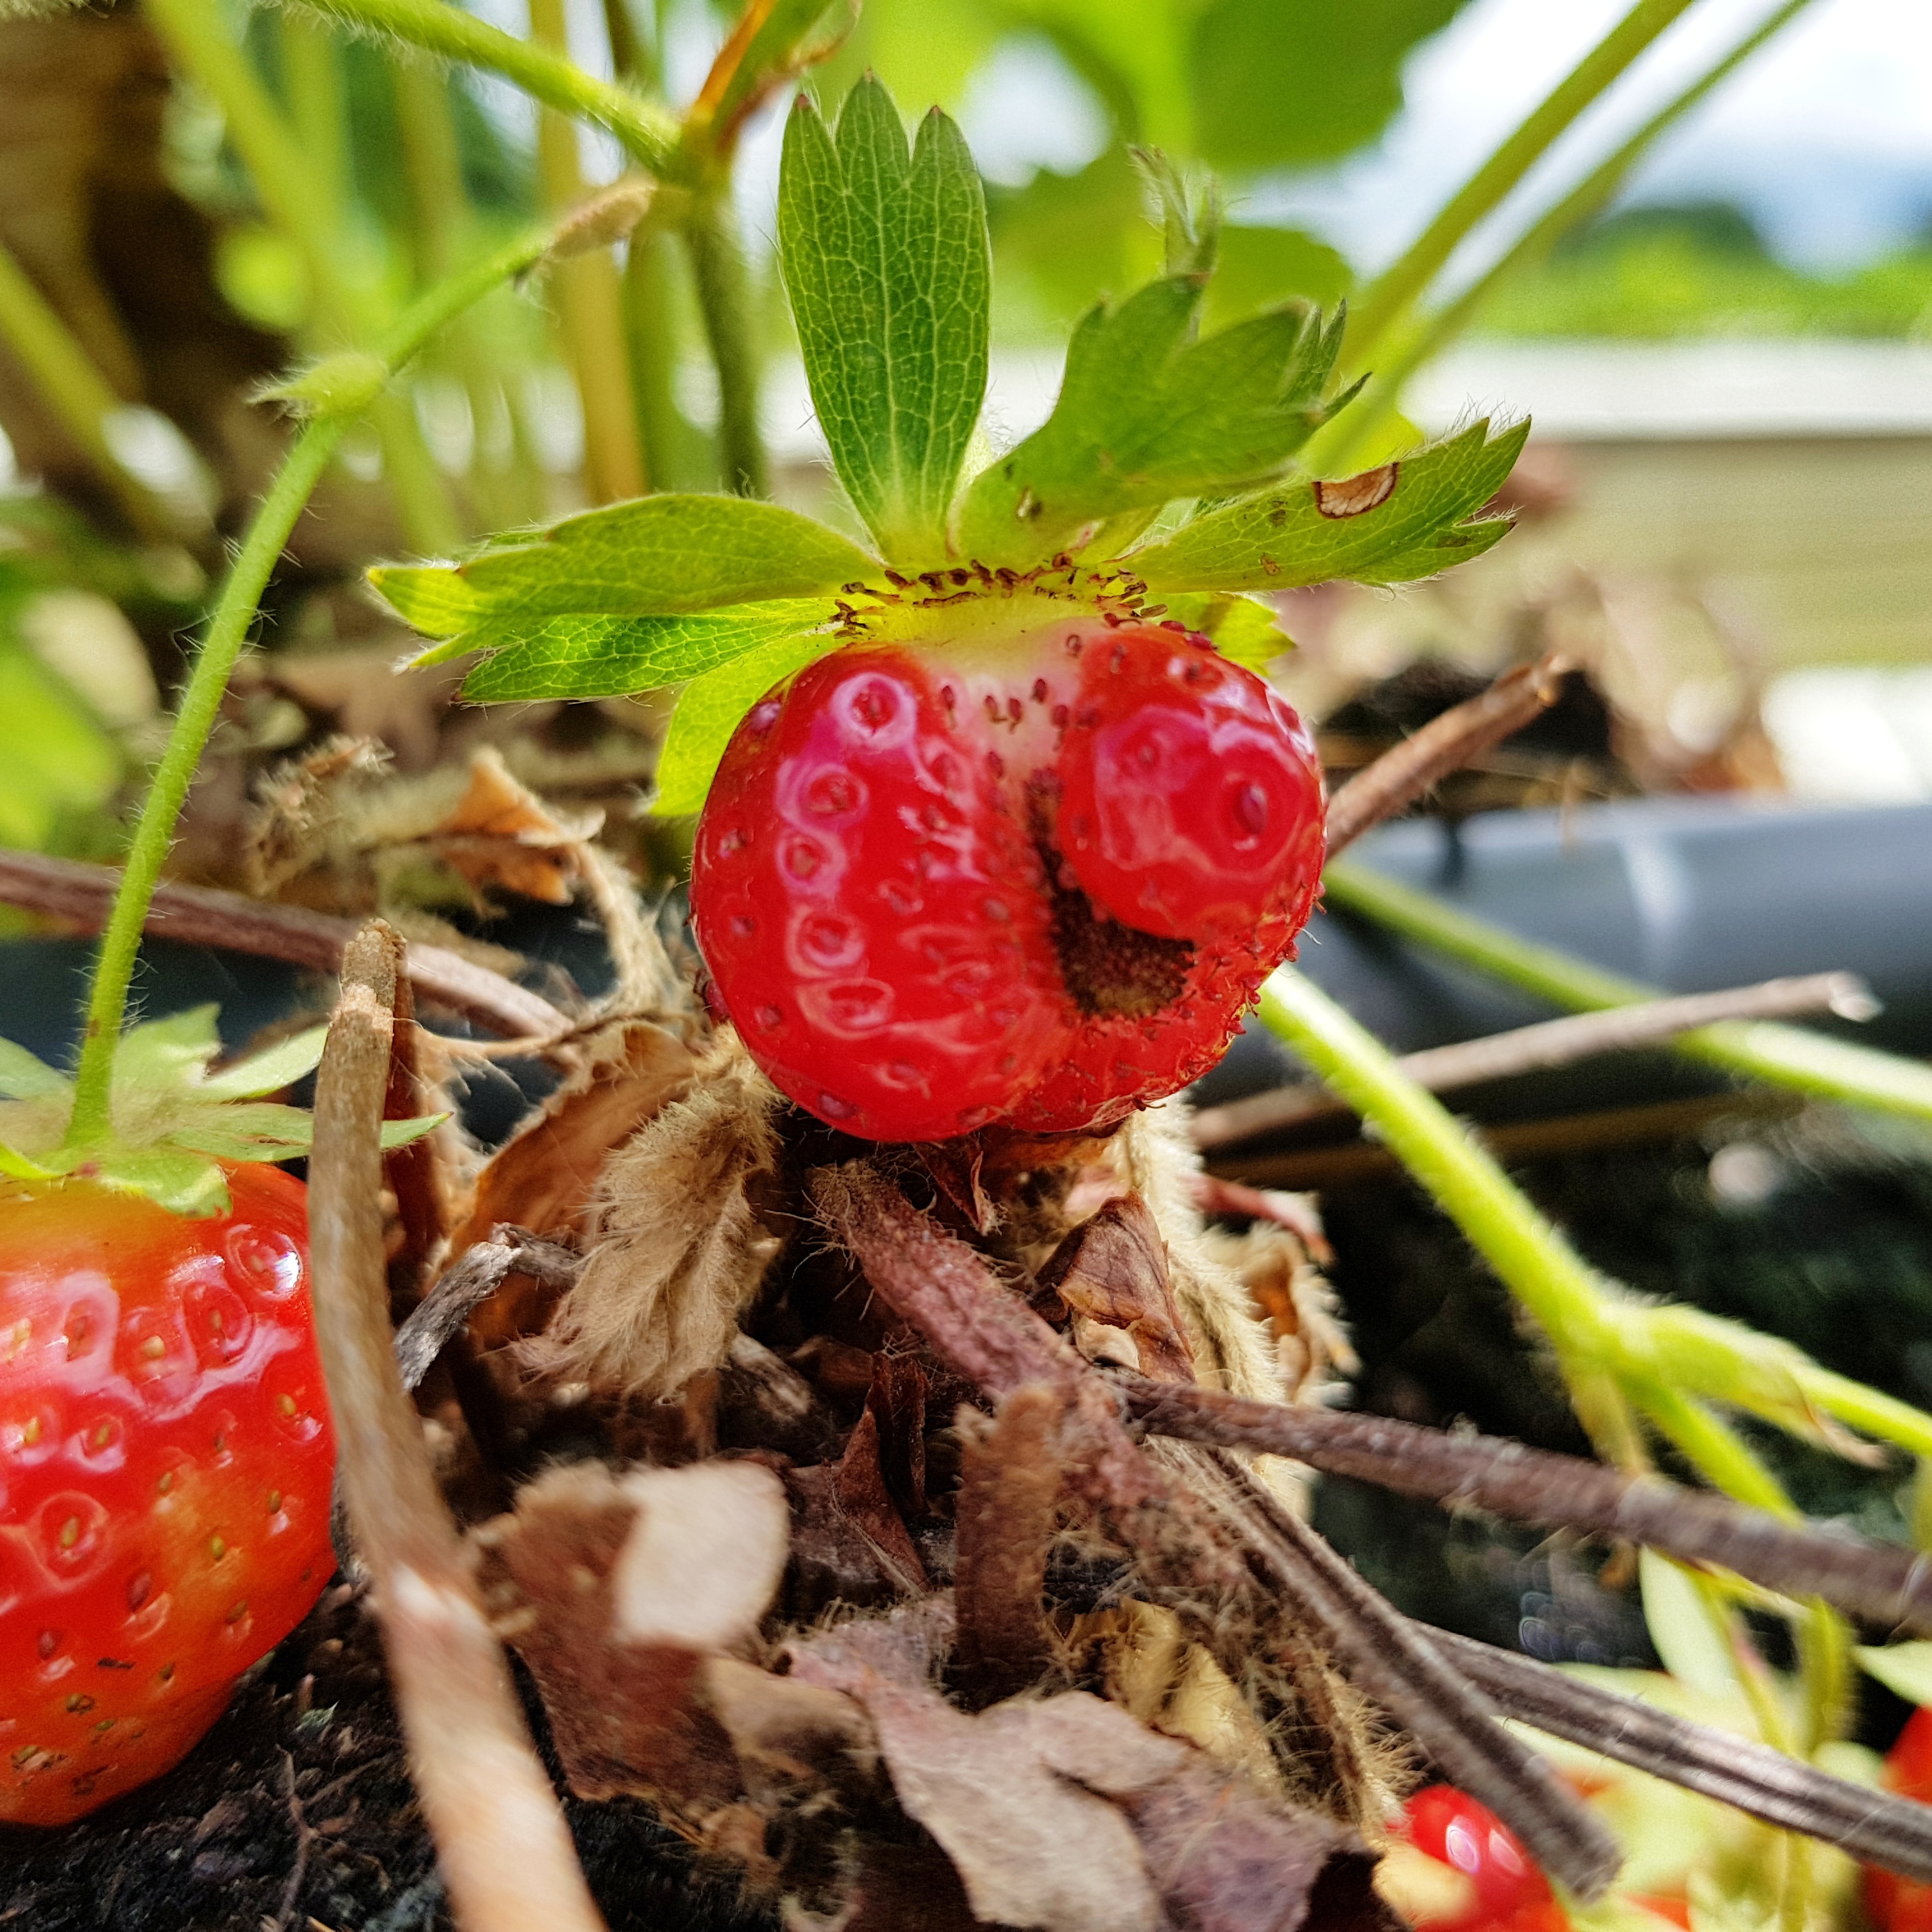 strawberry, smiley face fruit, fruit farm, pick your own, PYO, places to visit, Herts